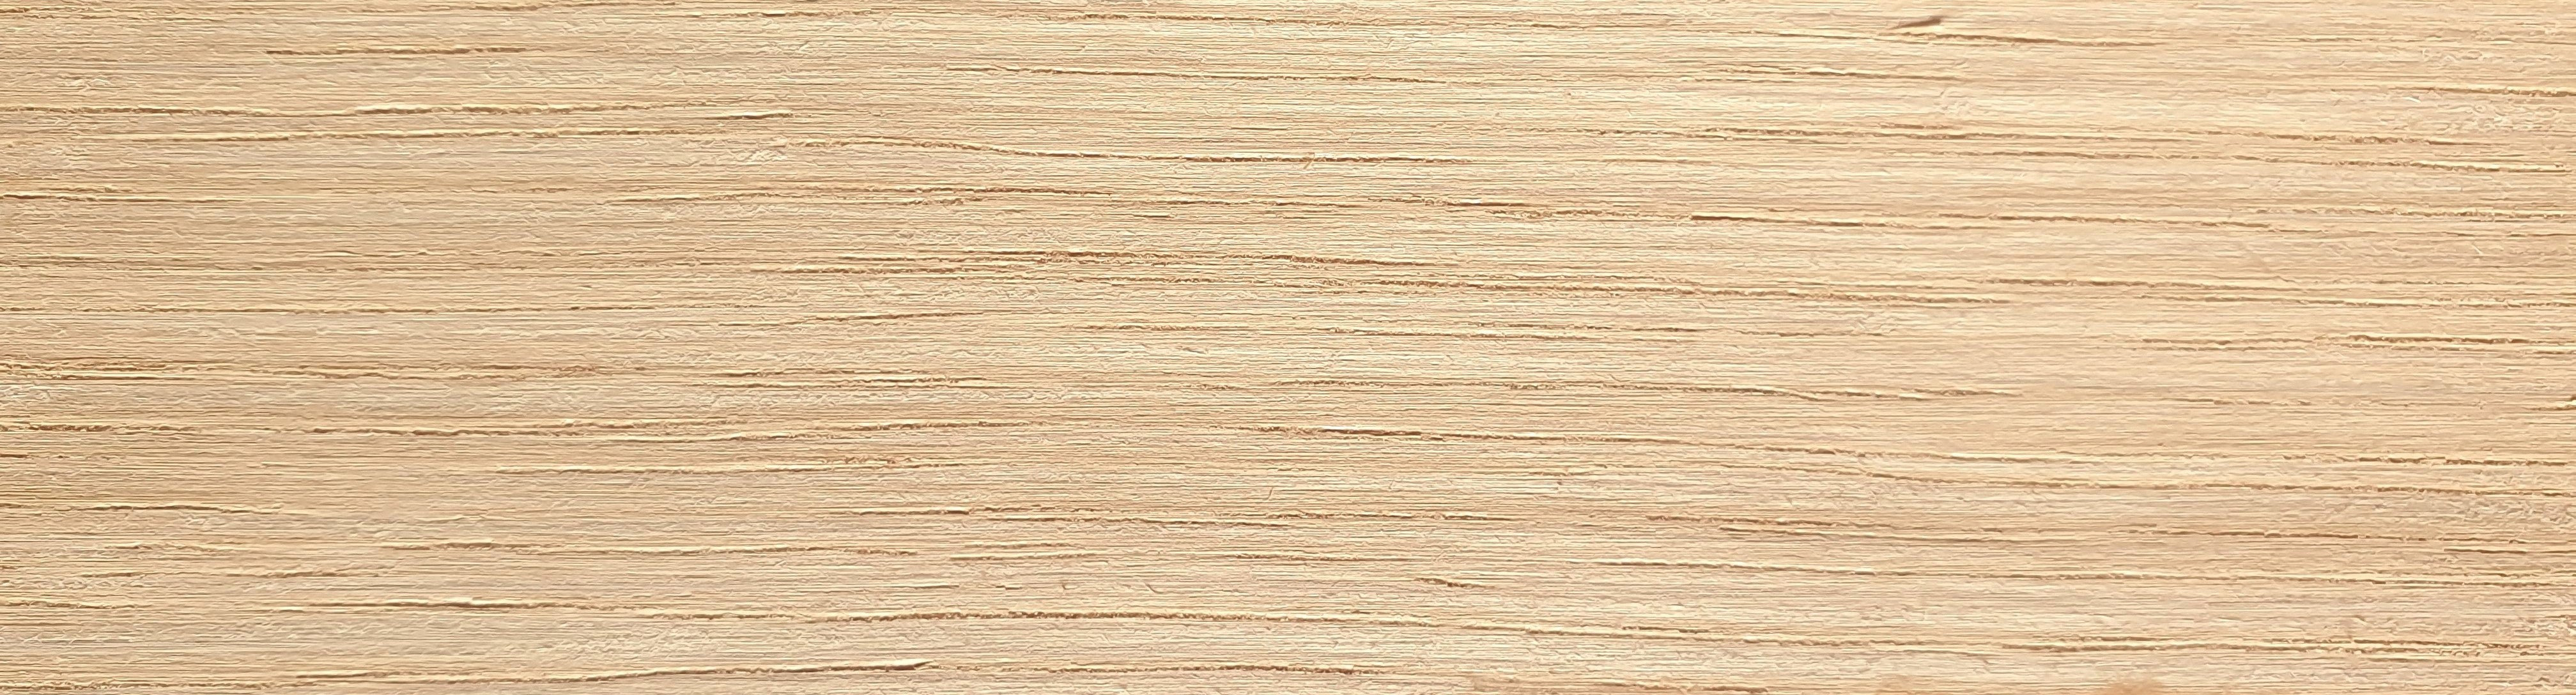 American White Oak Thickwood Unglued Edging / Lipping 2mm Thick Oak Wood Edging: Various Widths